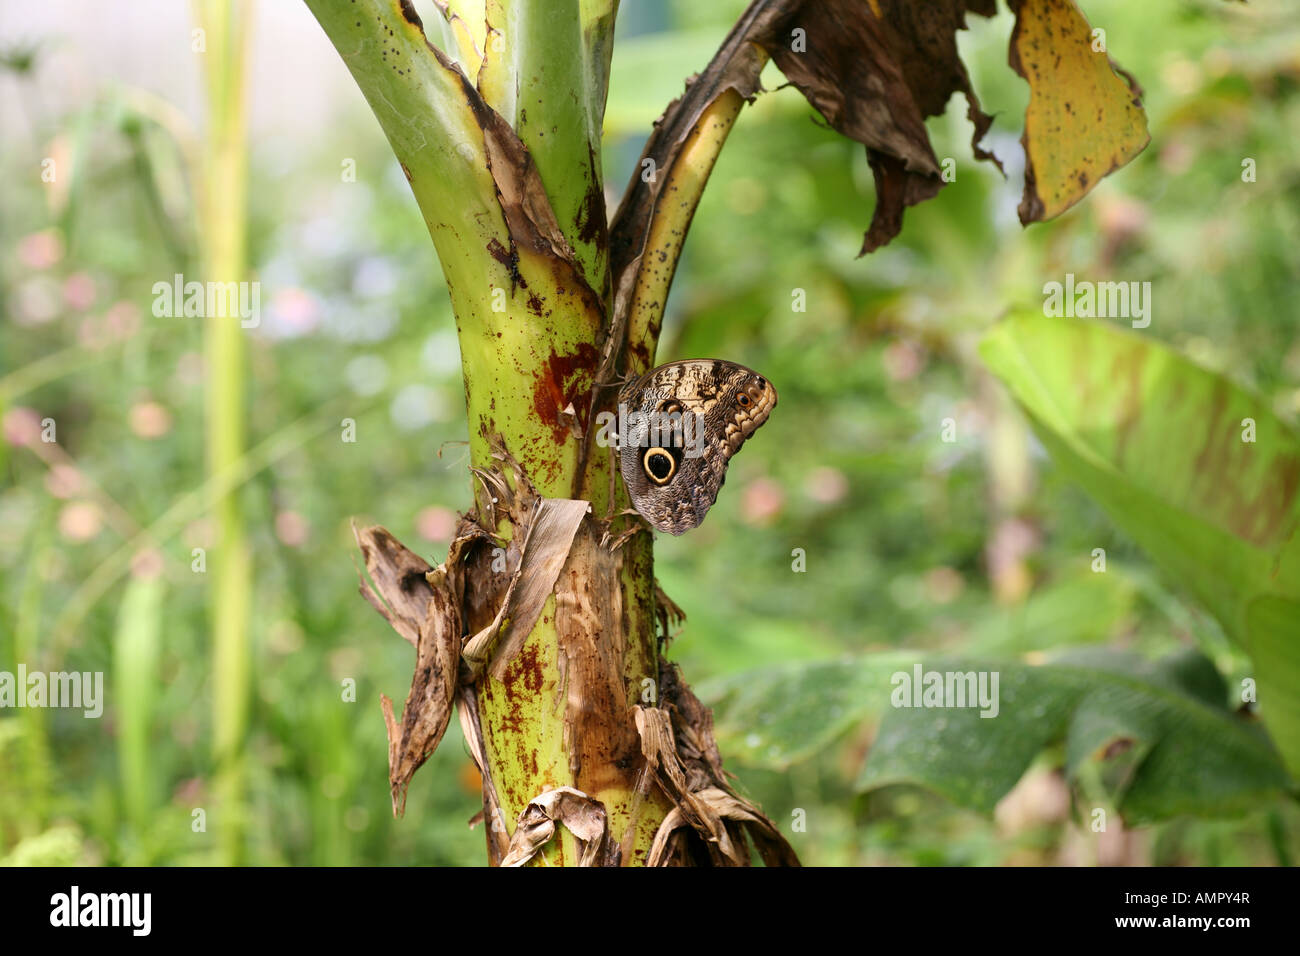 Owl Butterfly on plant Stock Photo